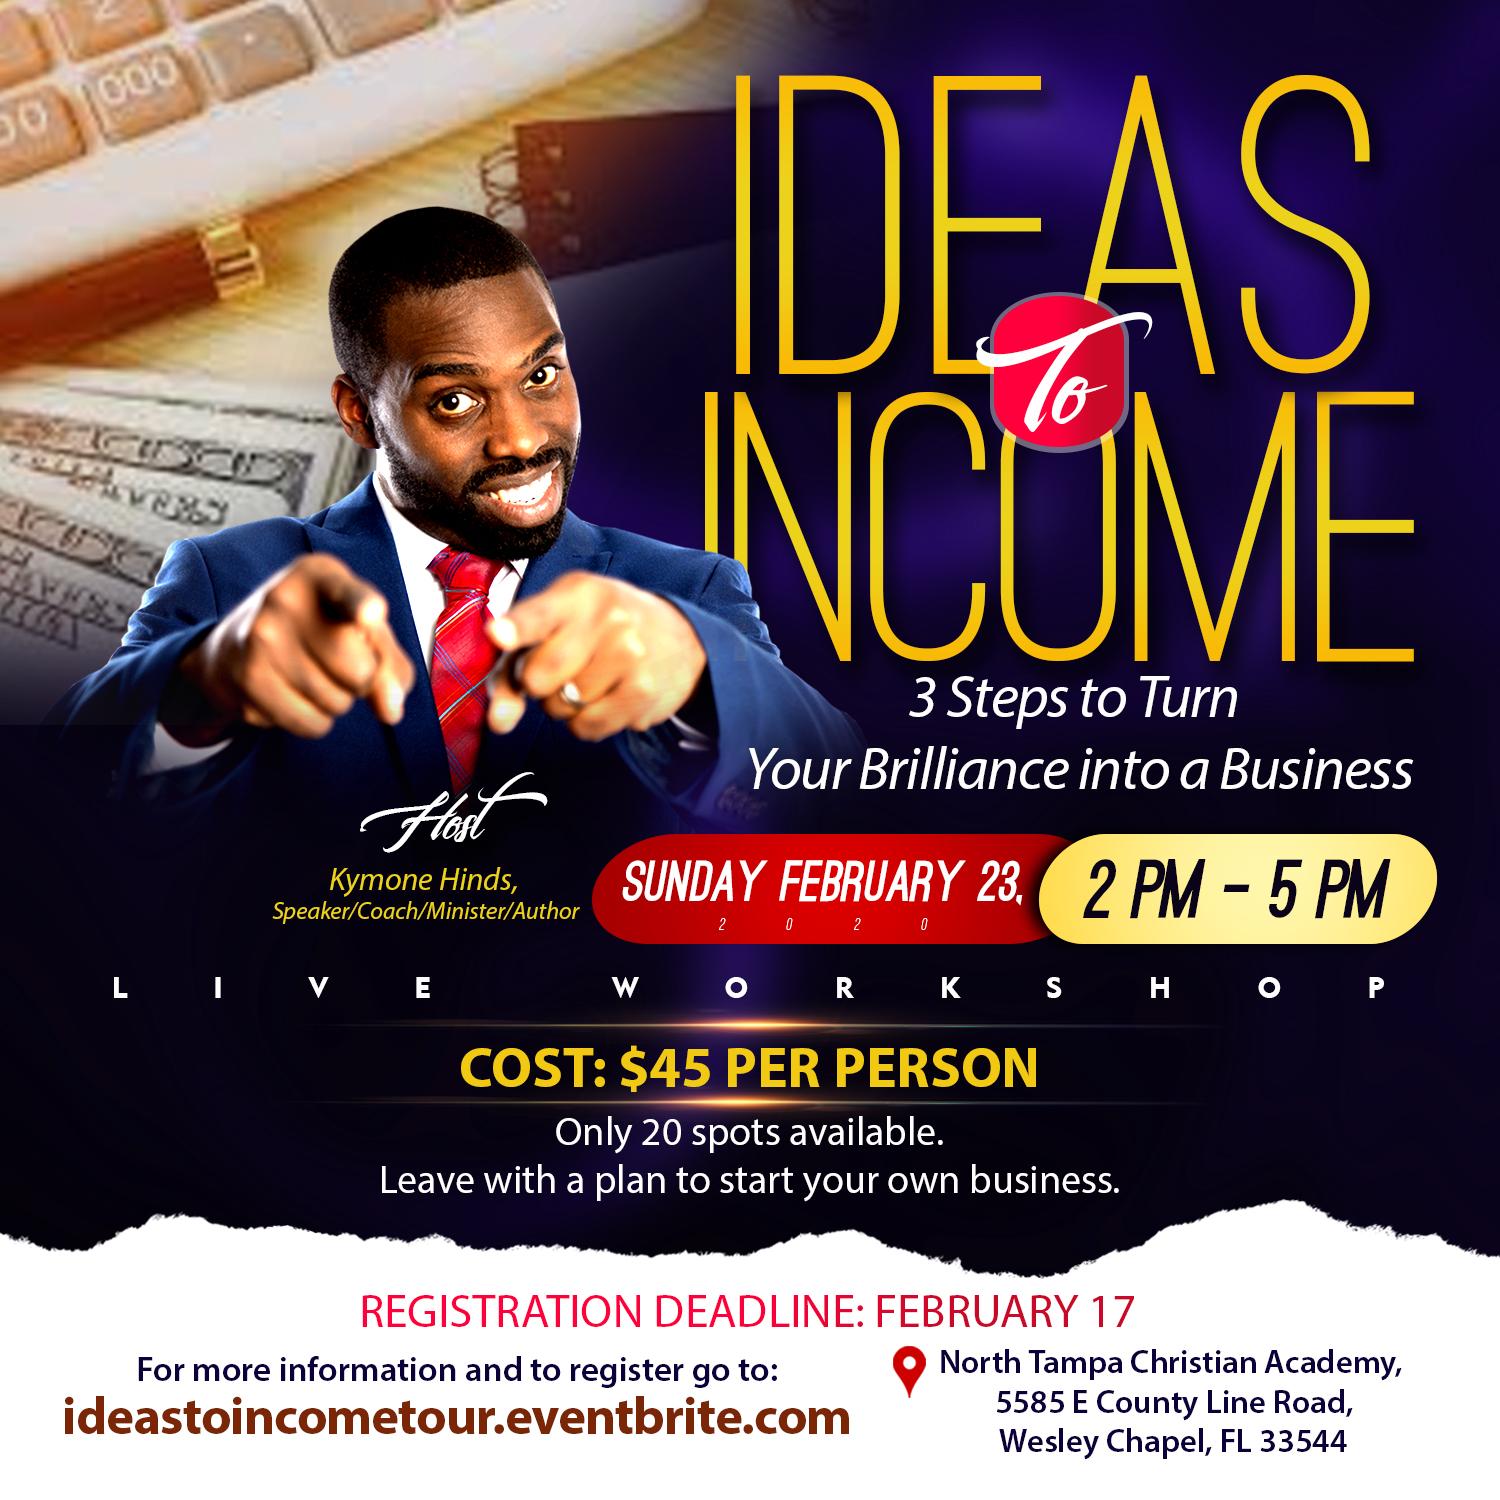 Ideas to Income: 3 Steps to Turn Your Brilliance into a Business (Tampa)